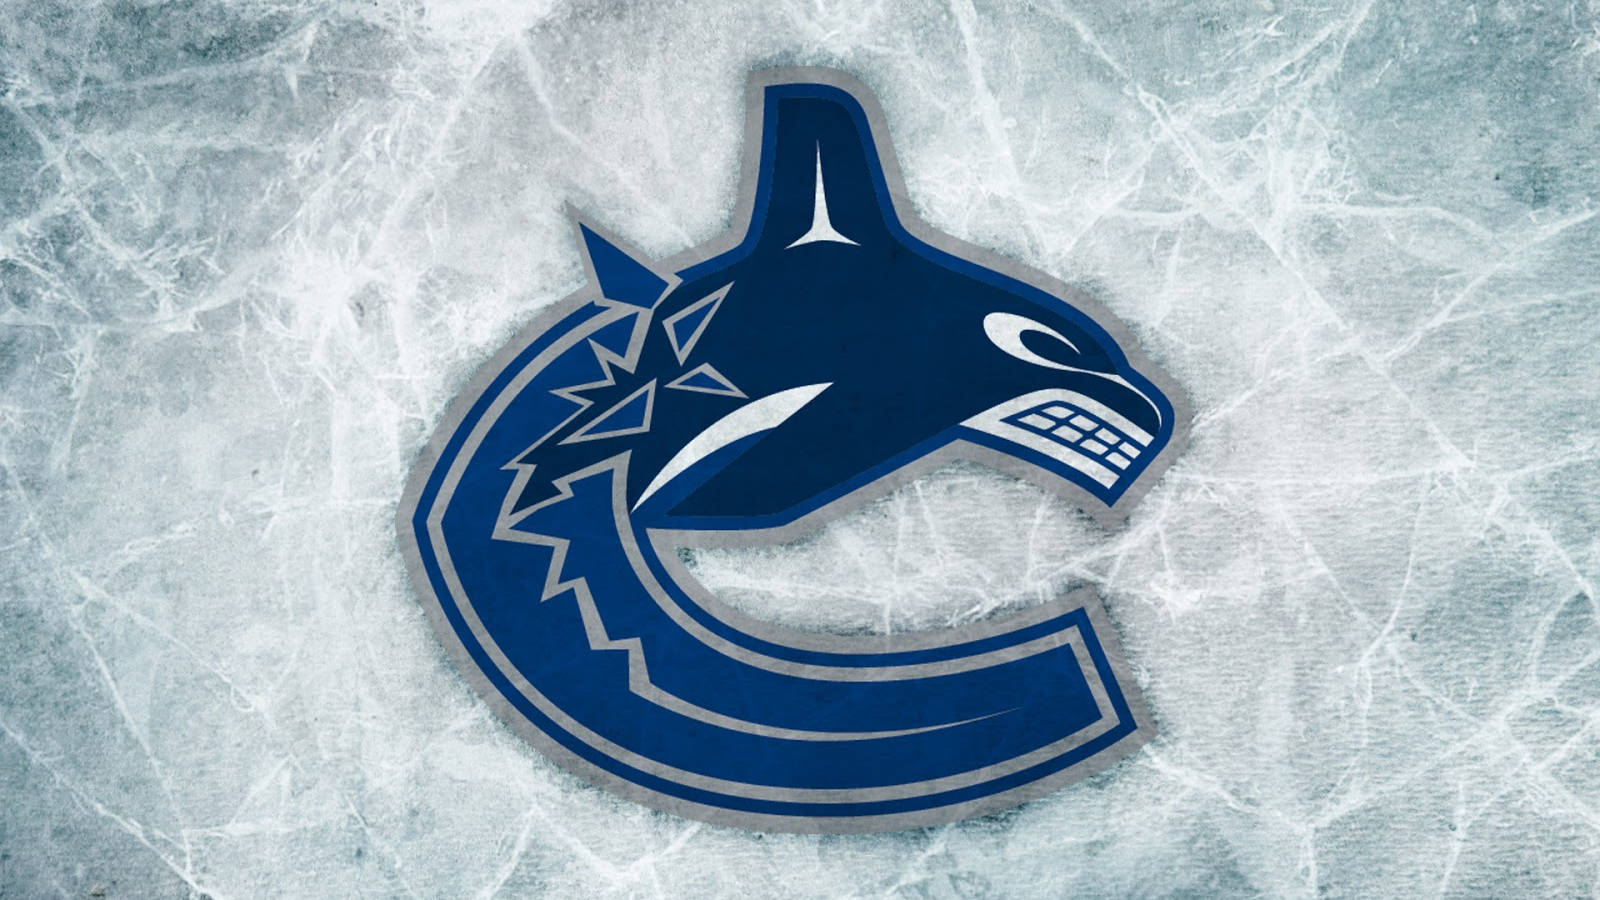 Vancouver Canucks Johnny Canucks iPhone 5 Wallpaper